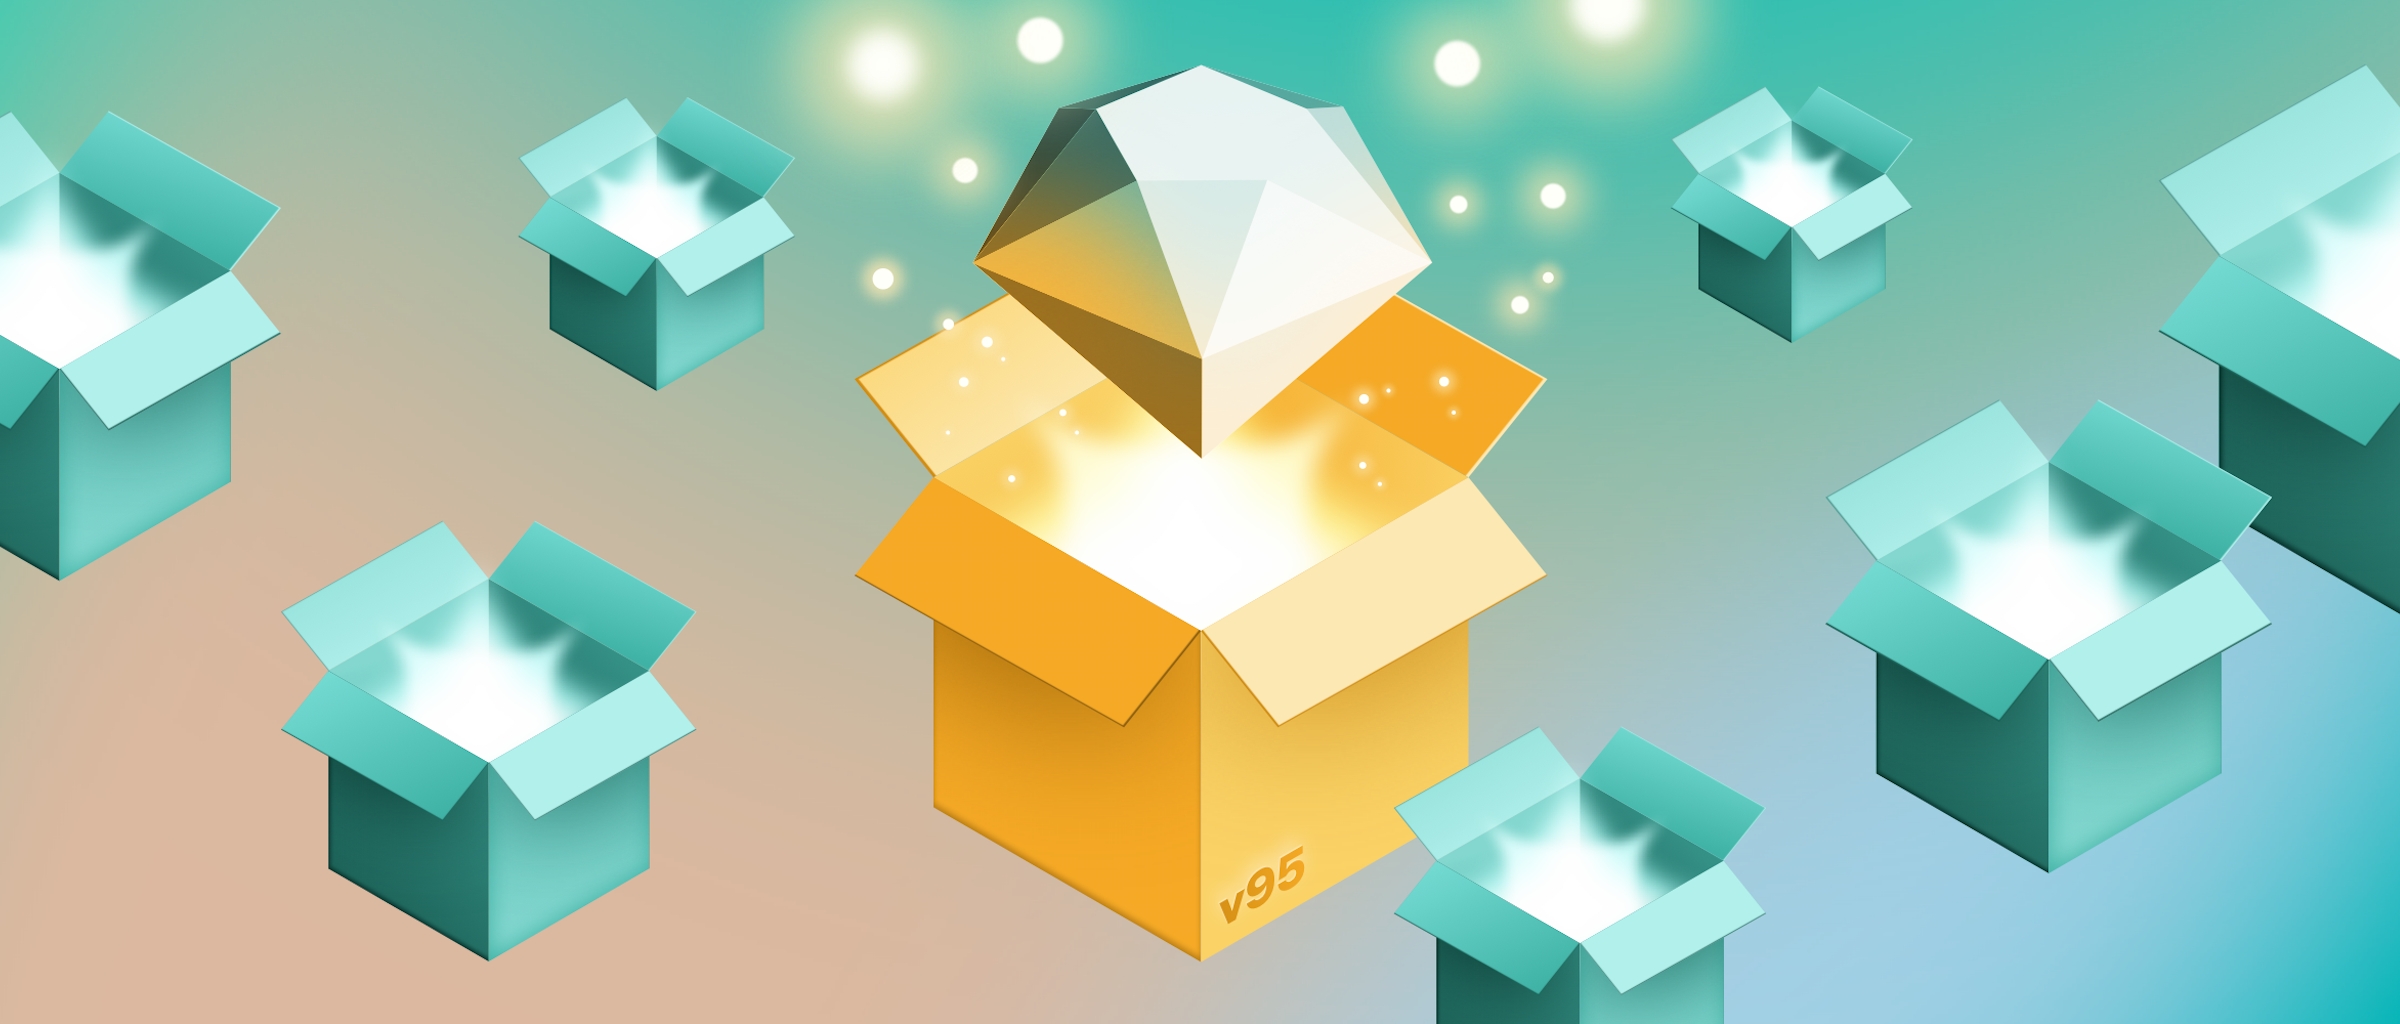 An image showing multiple boxes with a blue background. In the middle, the Sketch diamond is coming out of a yellow, shiny box. 